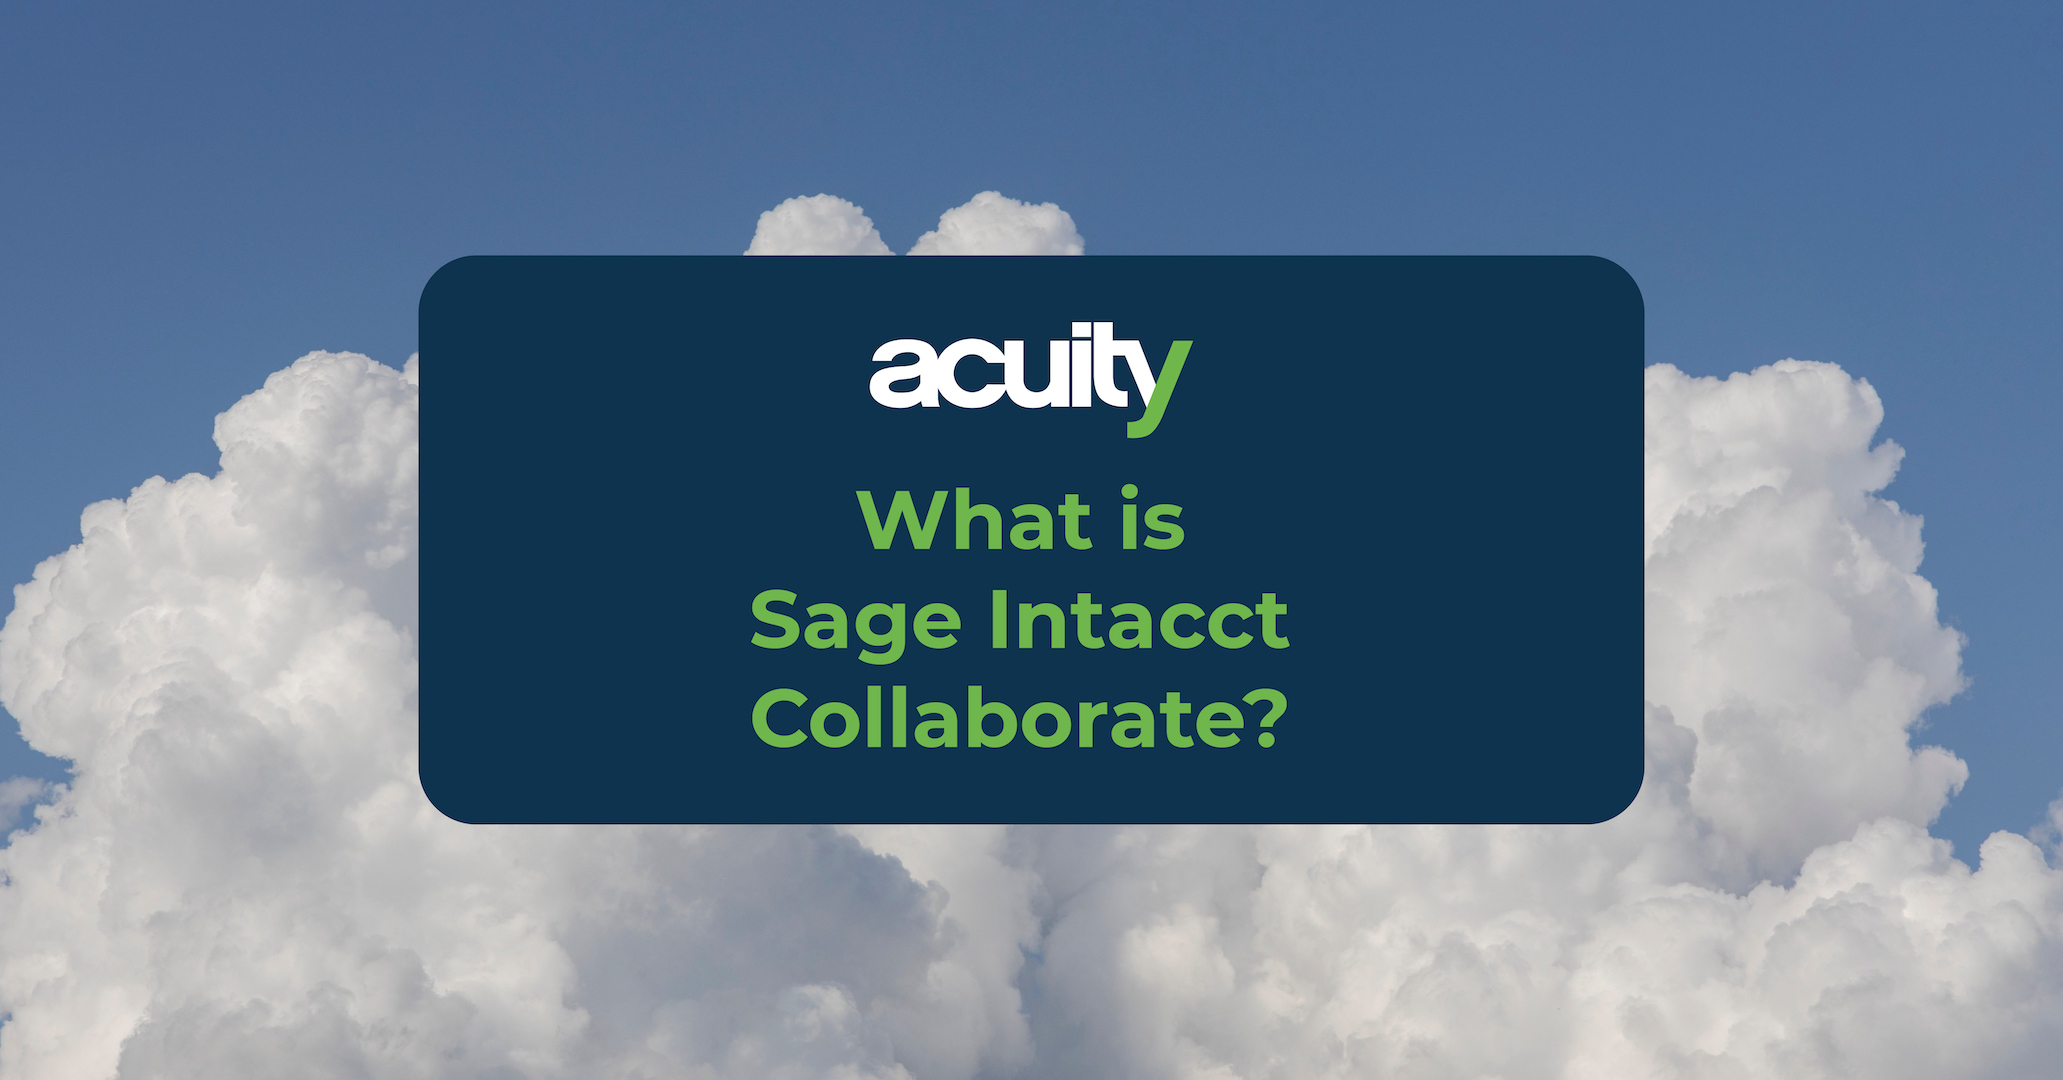 sage intacct collaborate